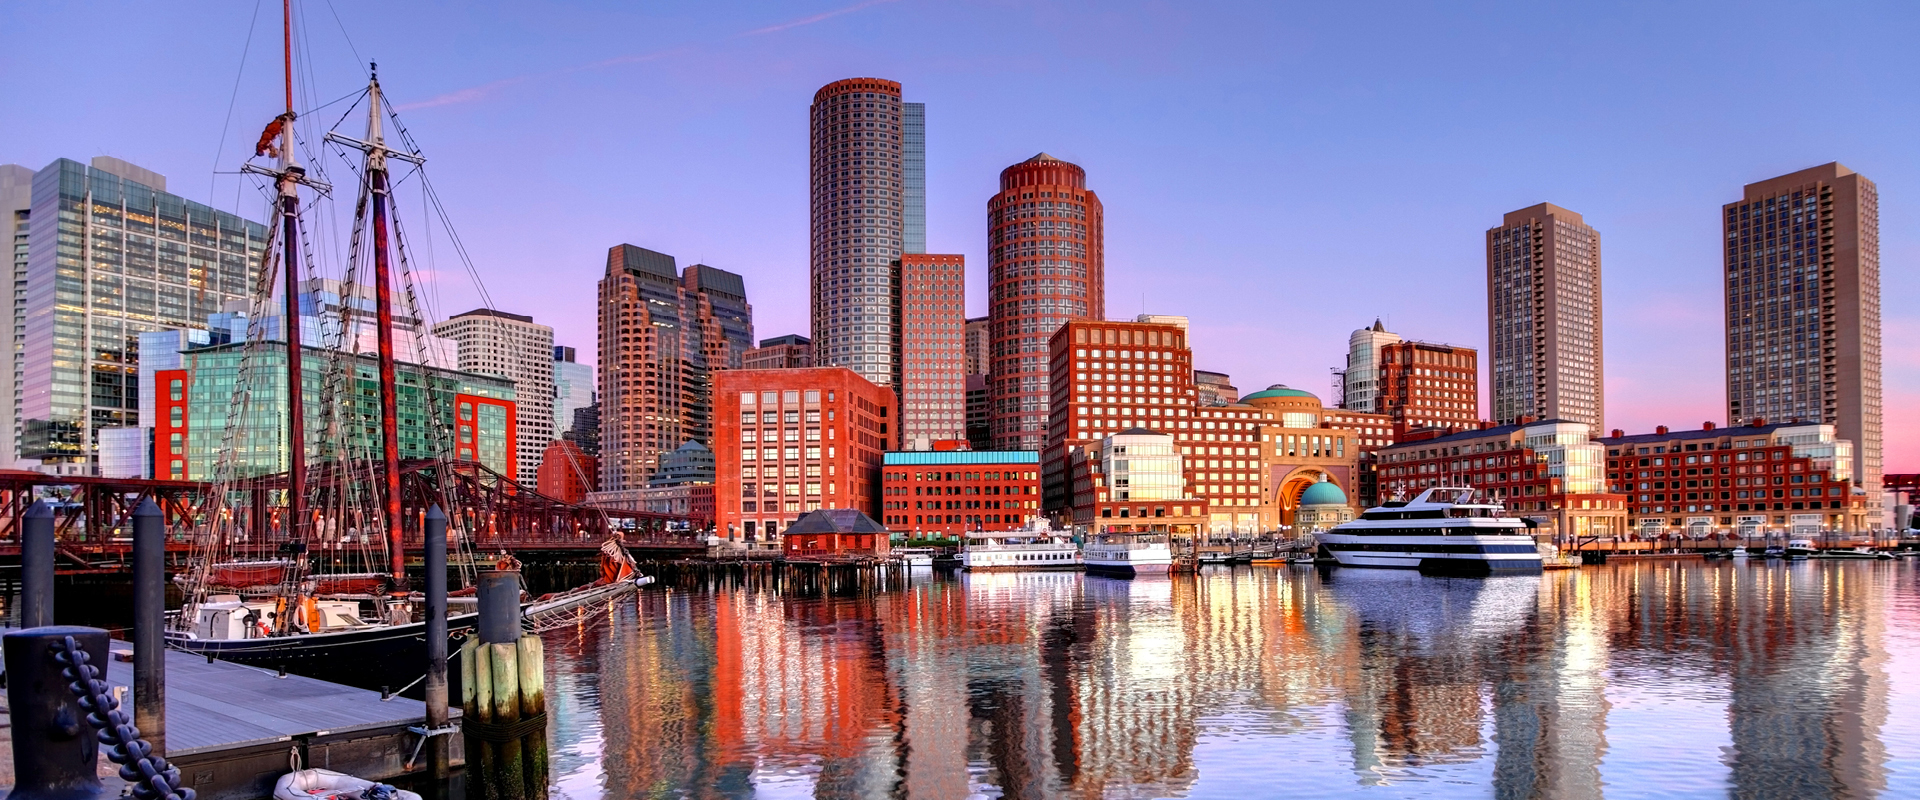  Boston MA skyline in early evening reflected in water